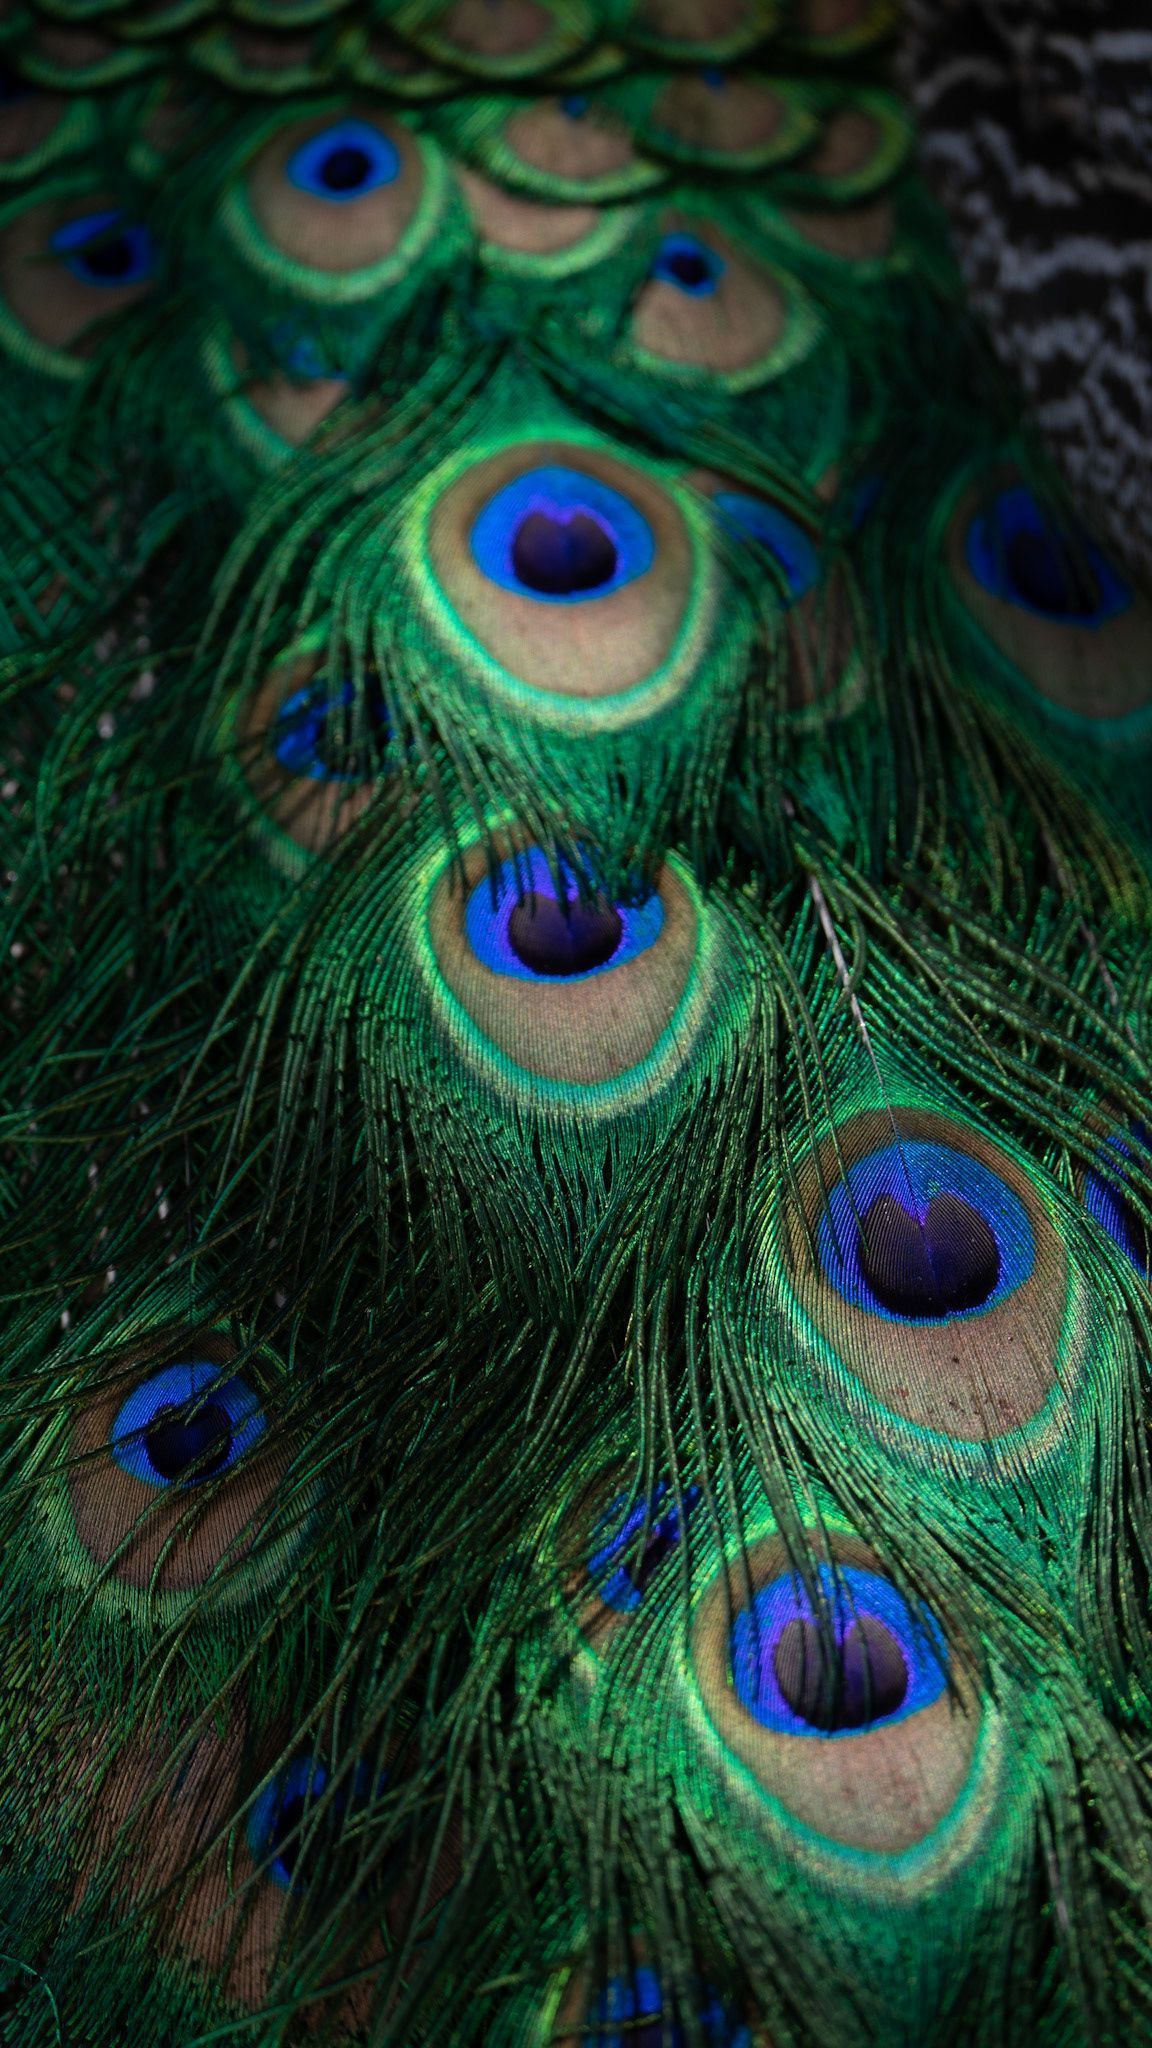 A close up of a peacock's tail feathers. - Feathers, peacock, macro